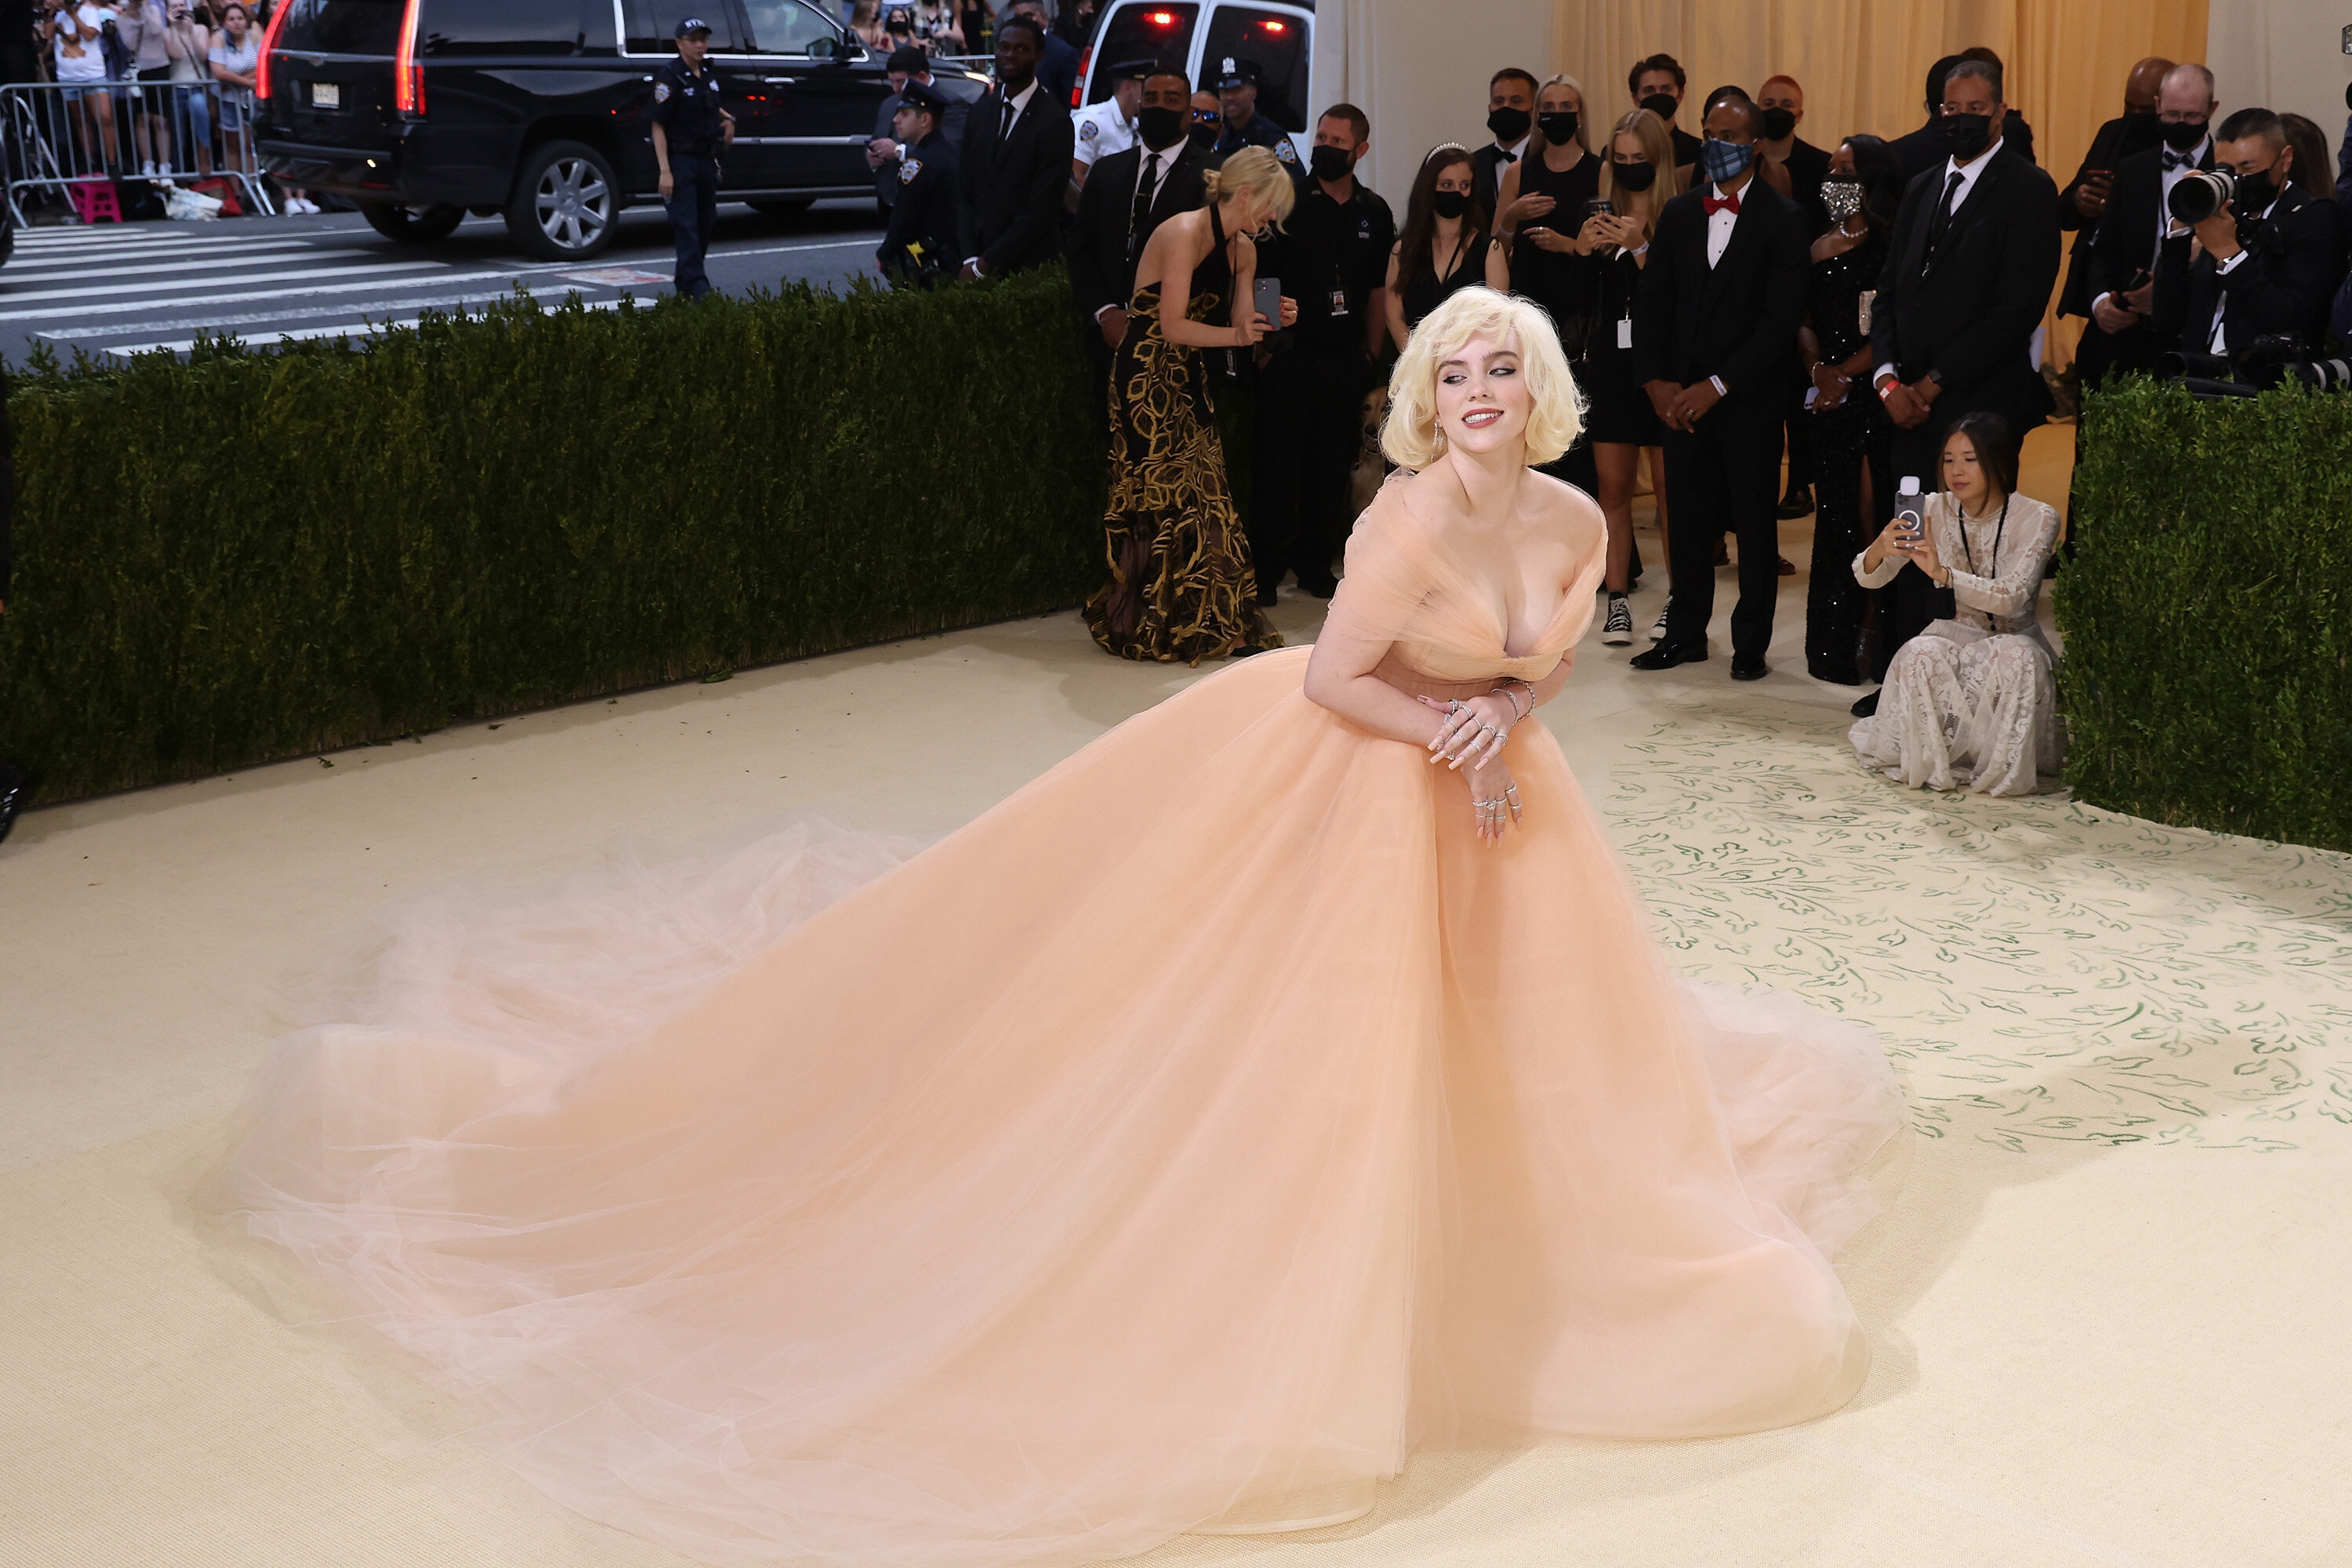 Met Gala 2022: Billie Eilish arrives for the event dressed in silky corset  gown - Entertainment News